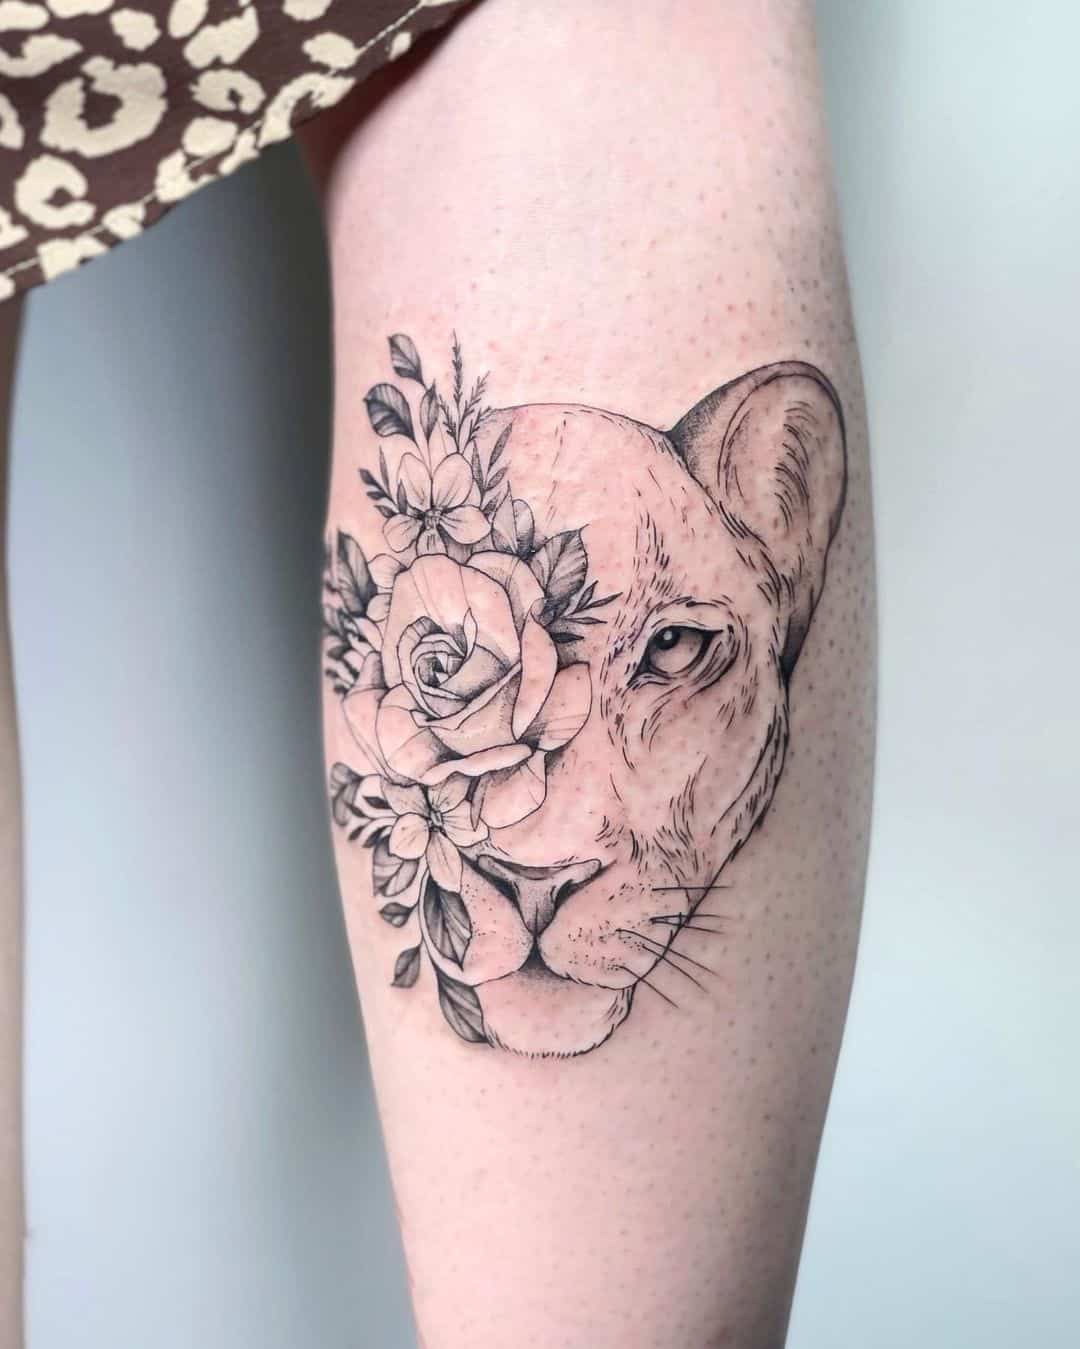 Lioness and flower tattoo